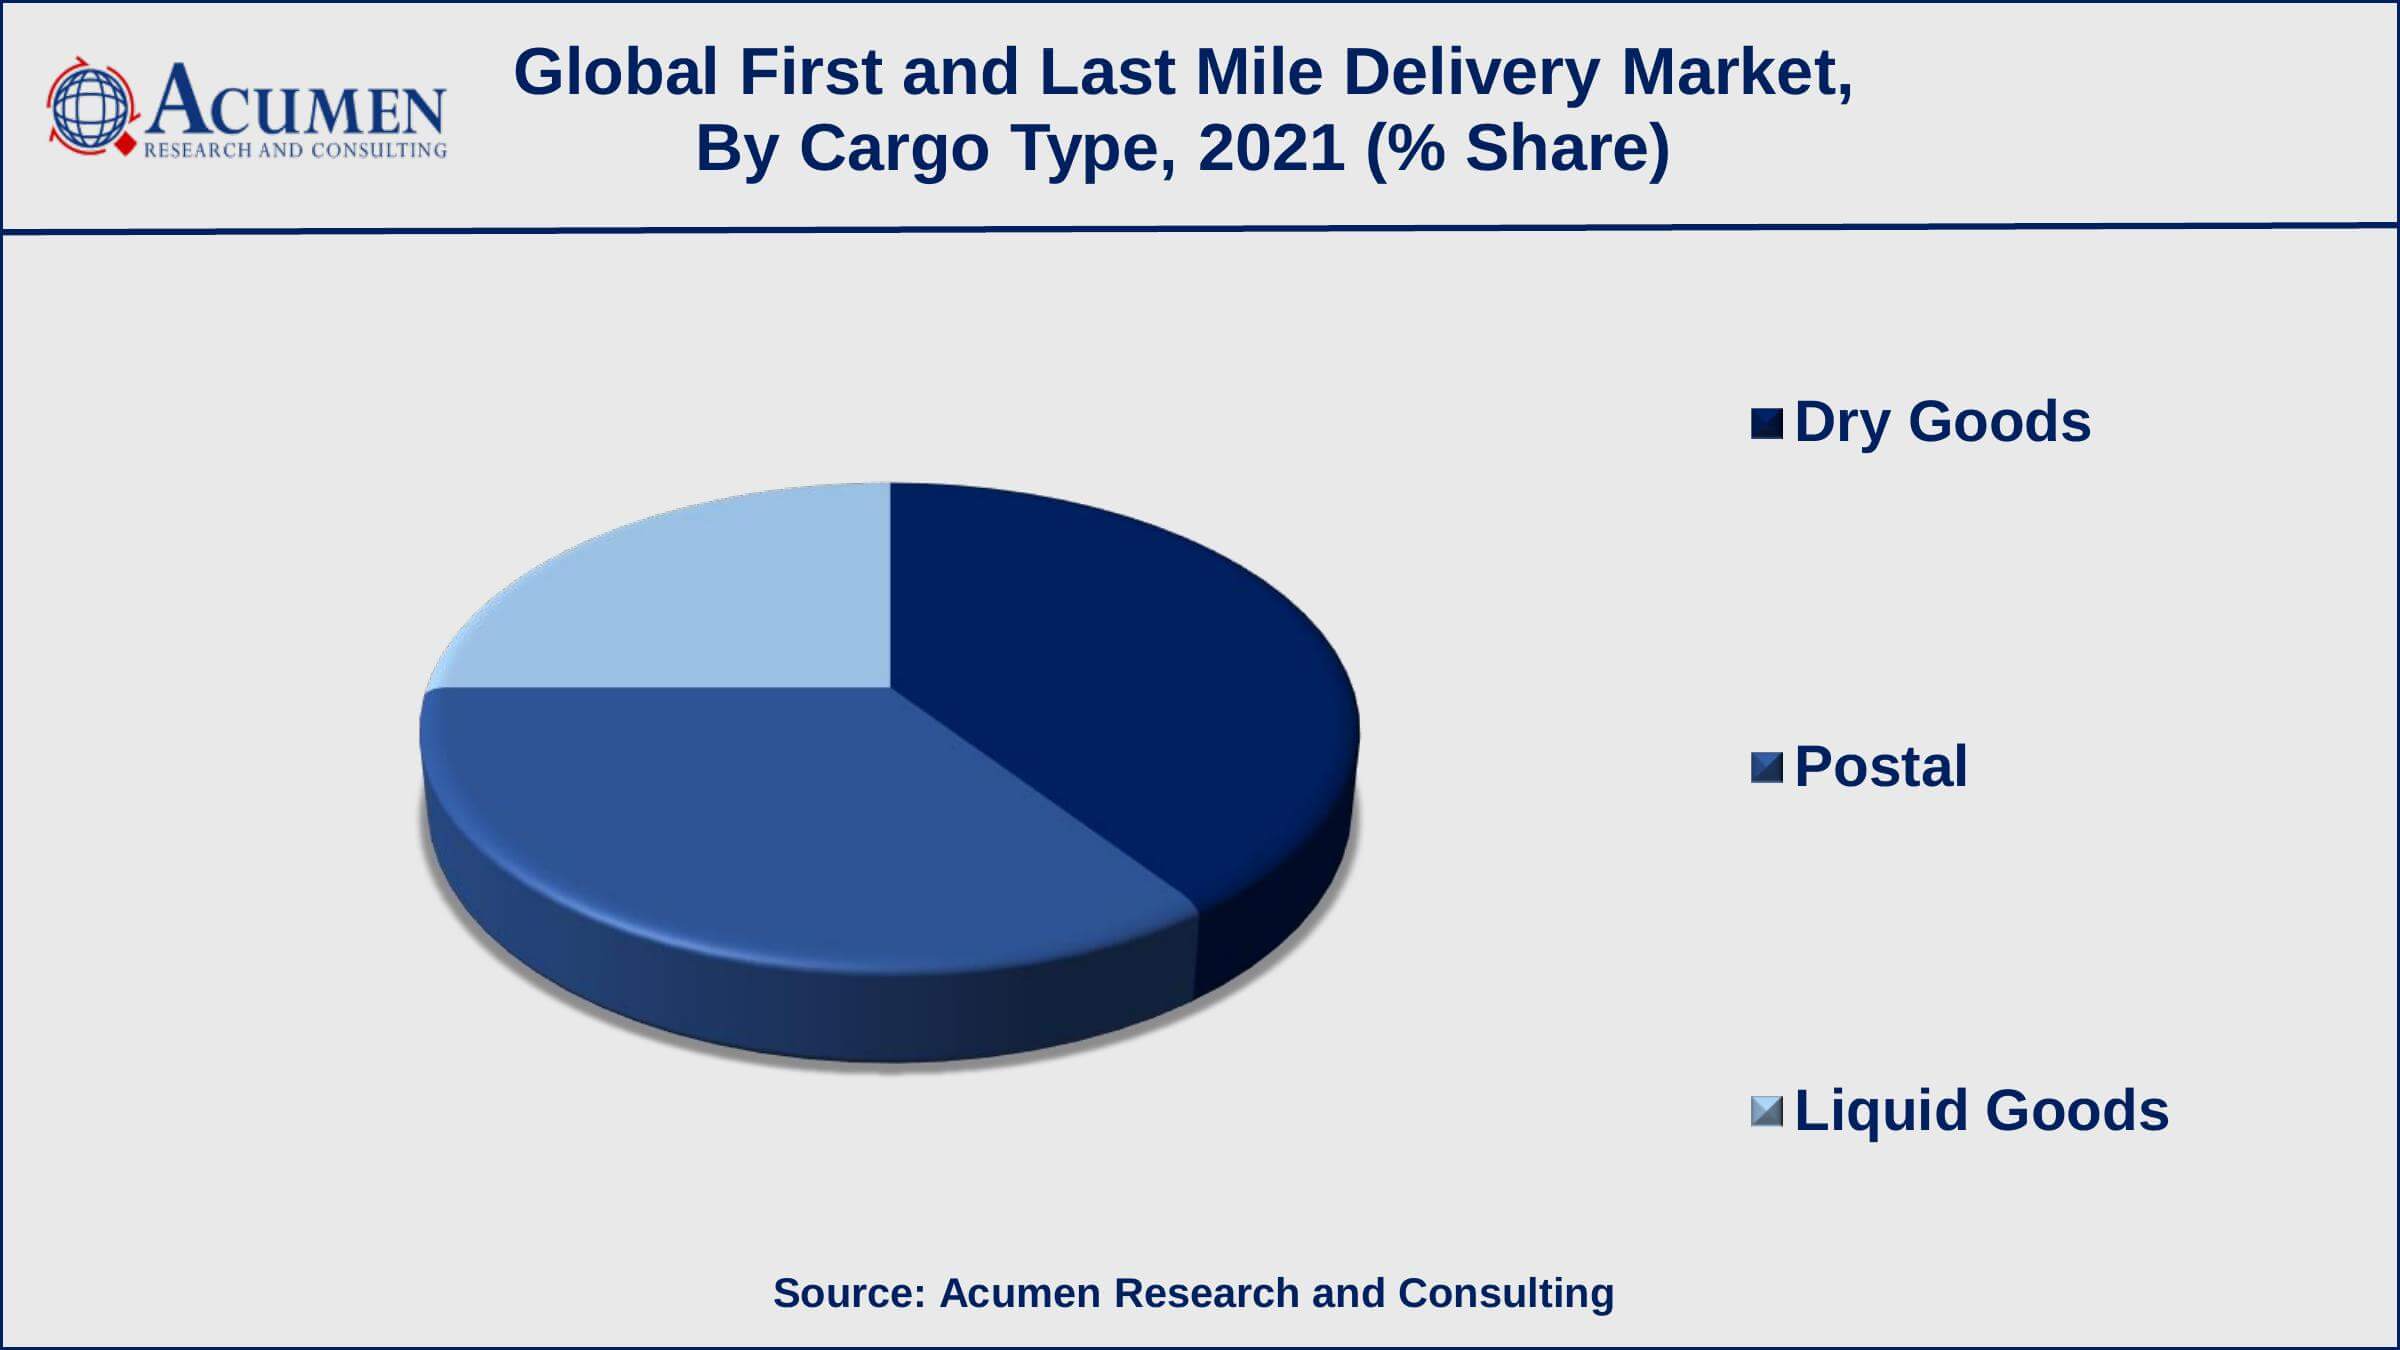 Among cargo type, dry goods recorded 39% shares in 2021 Growing adoption of drones in delivery is a popular first and last mile delivery market trend that fuels the industry demand